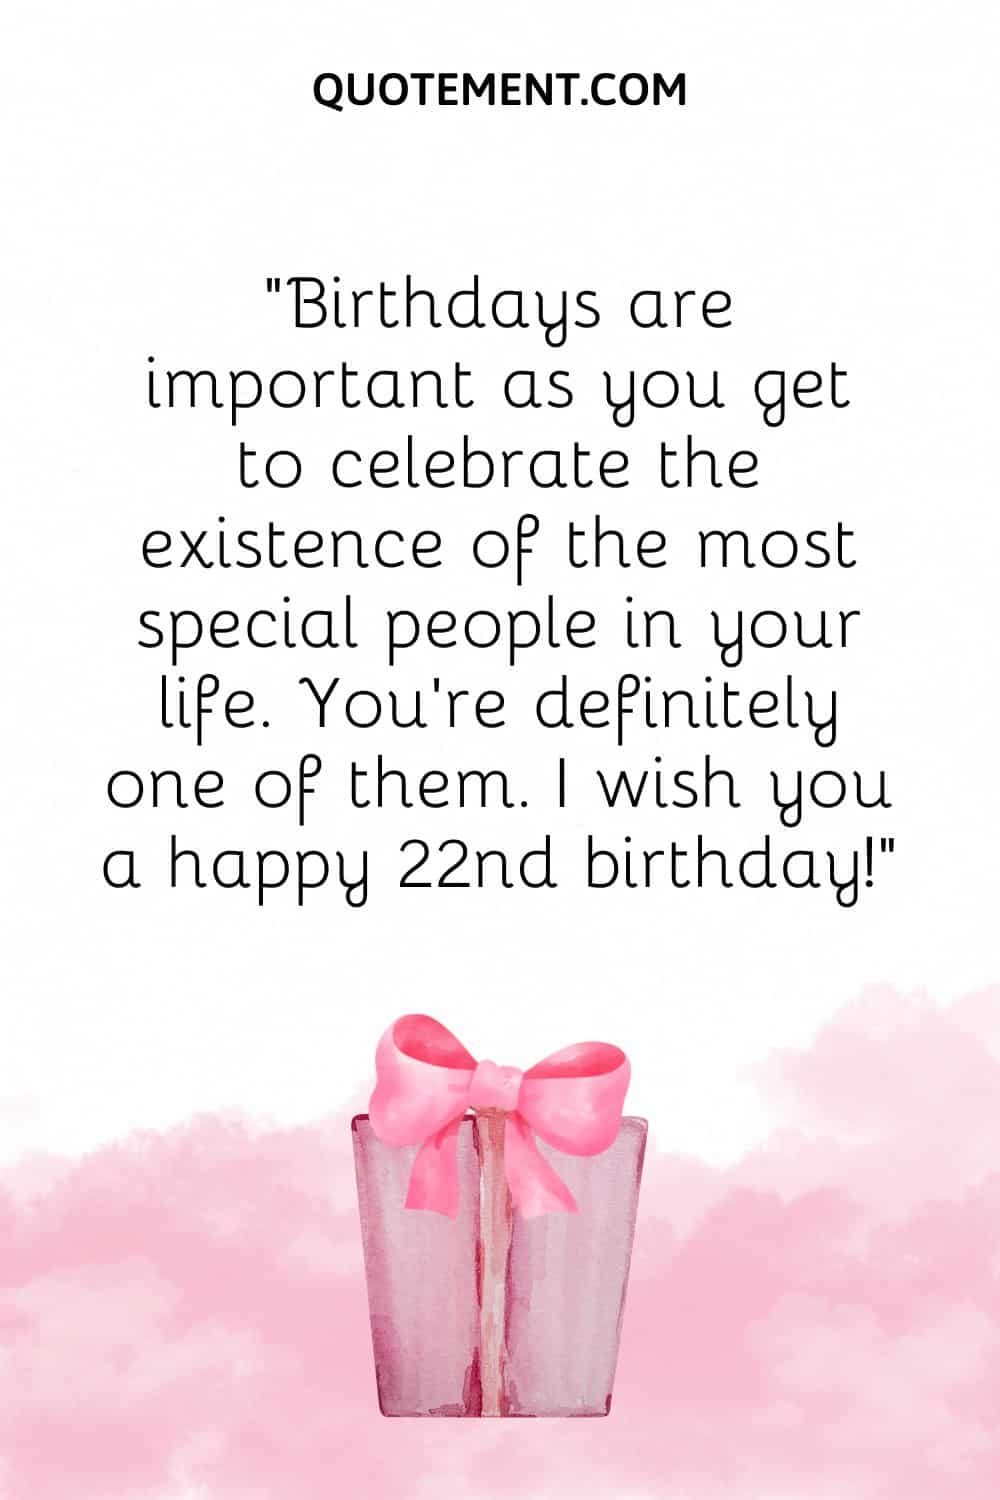 Birthdays are important as you get to celebrate the existence of the most special people in your life